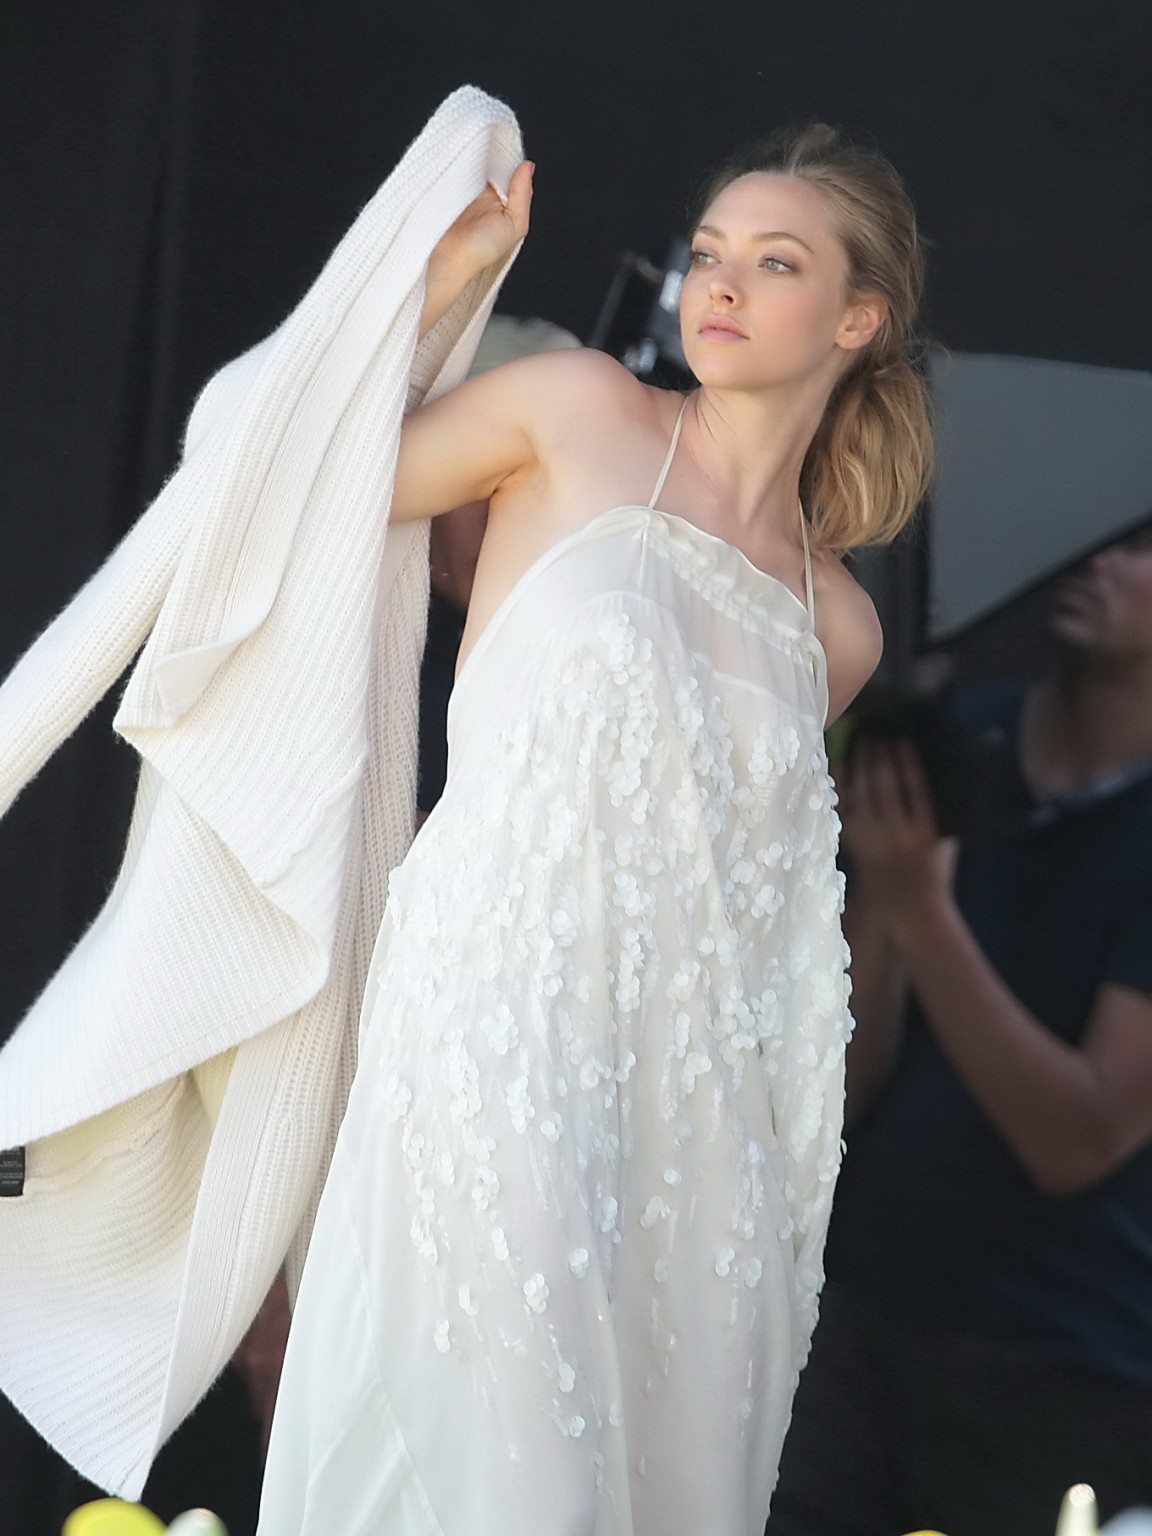 Amanda Seyfried showing boobs in white transparent nightie while filming video i #75172424